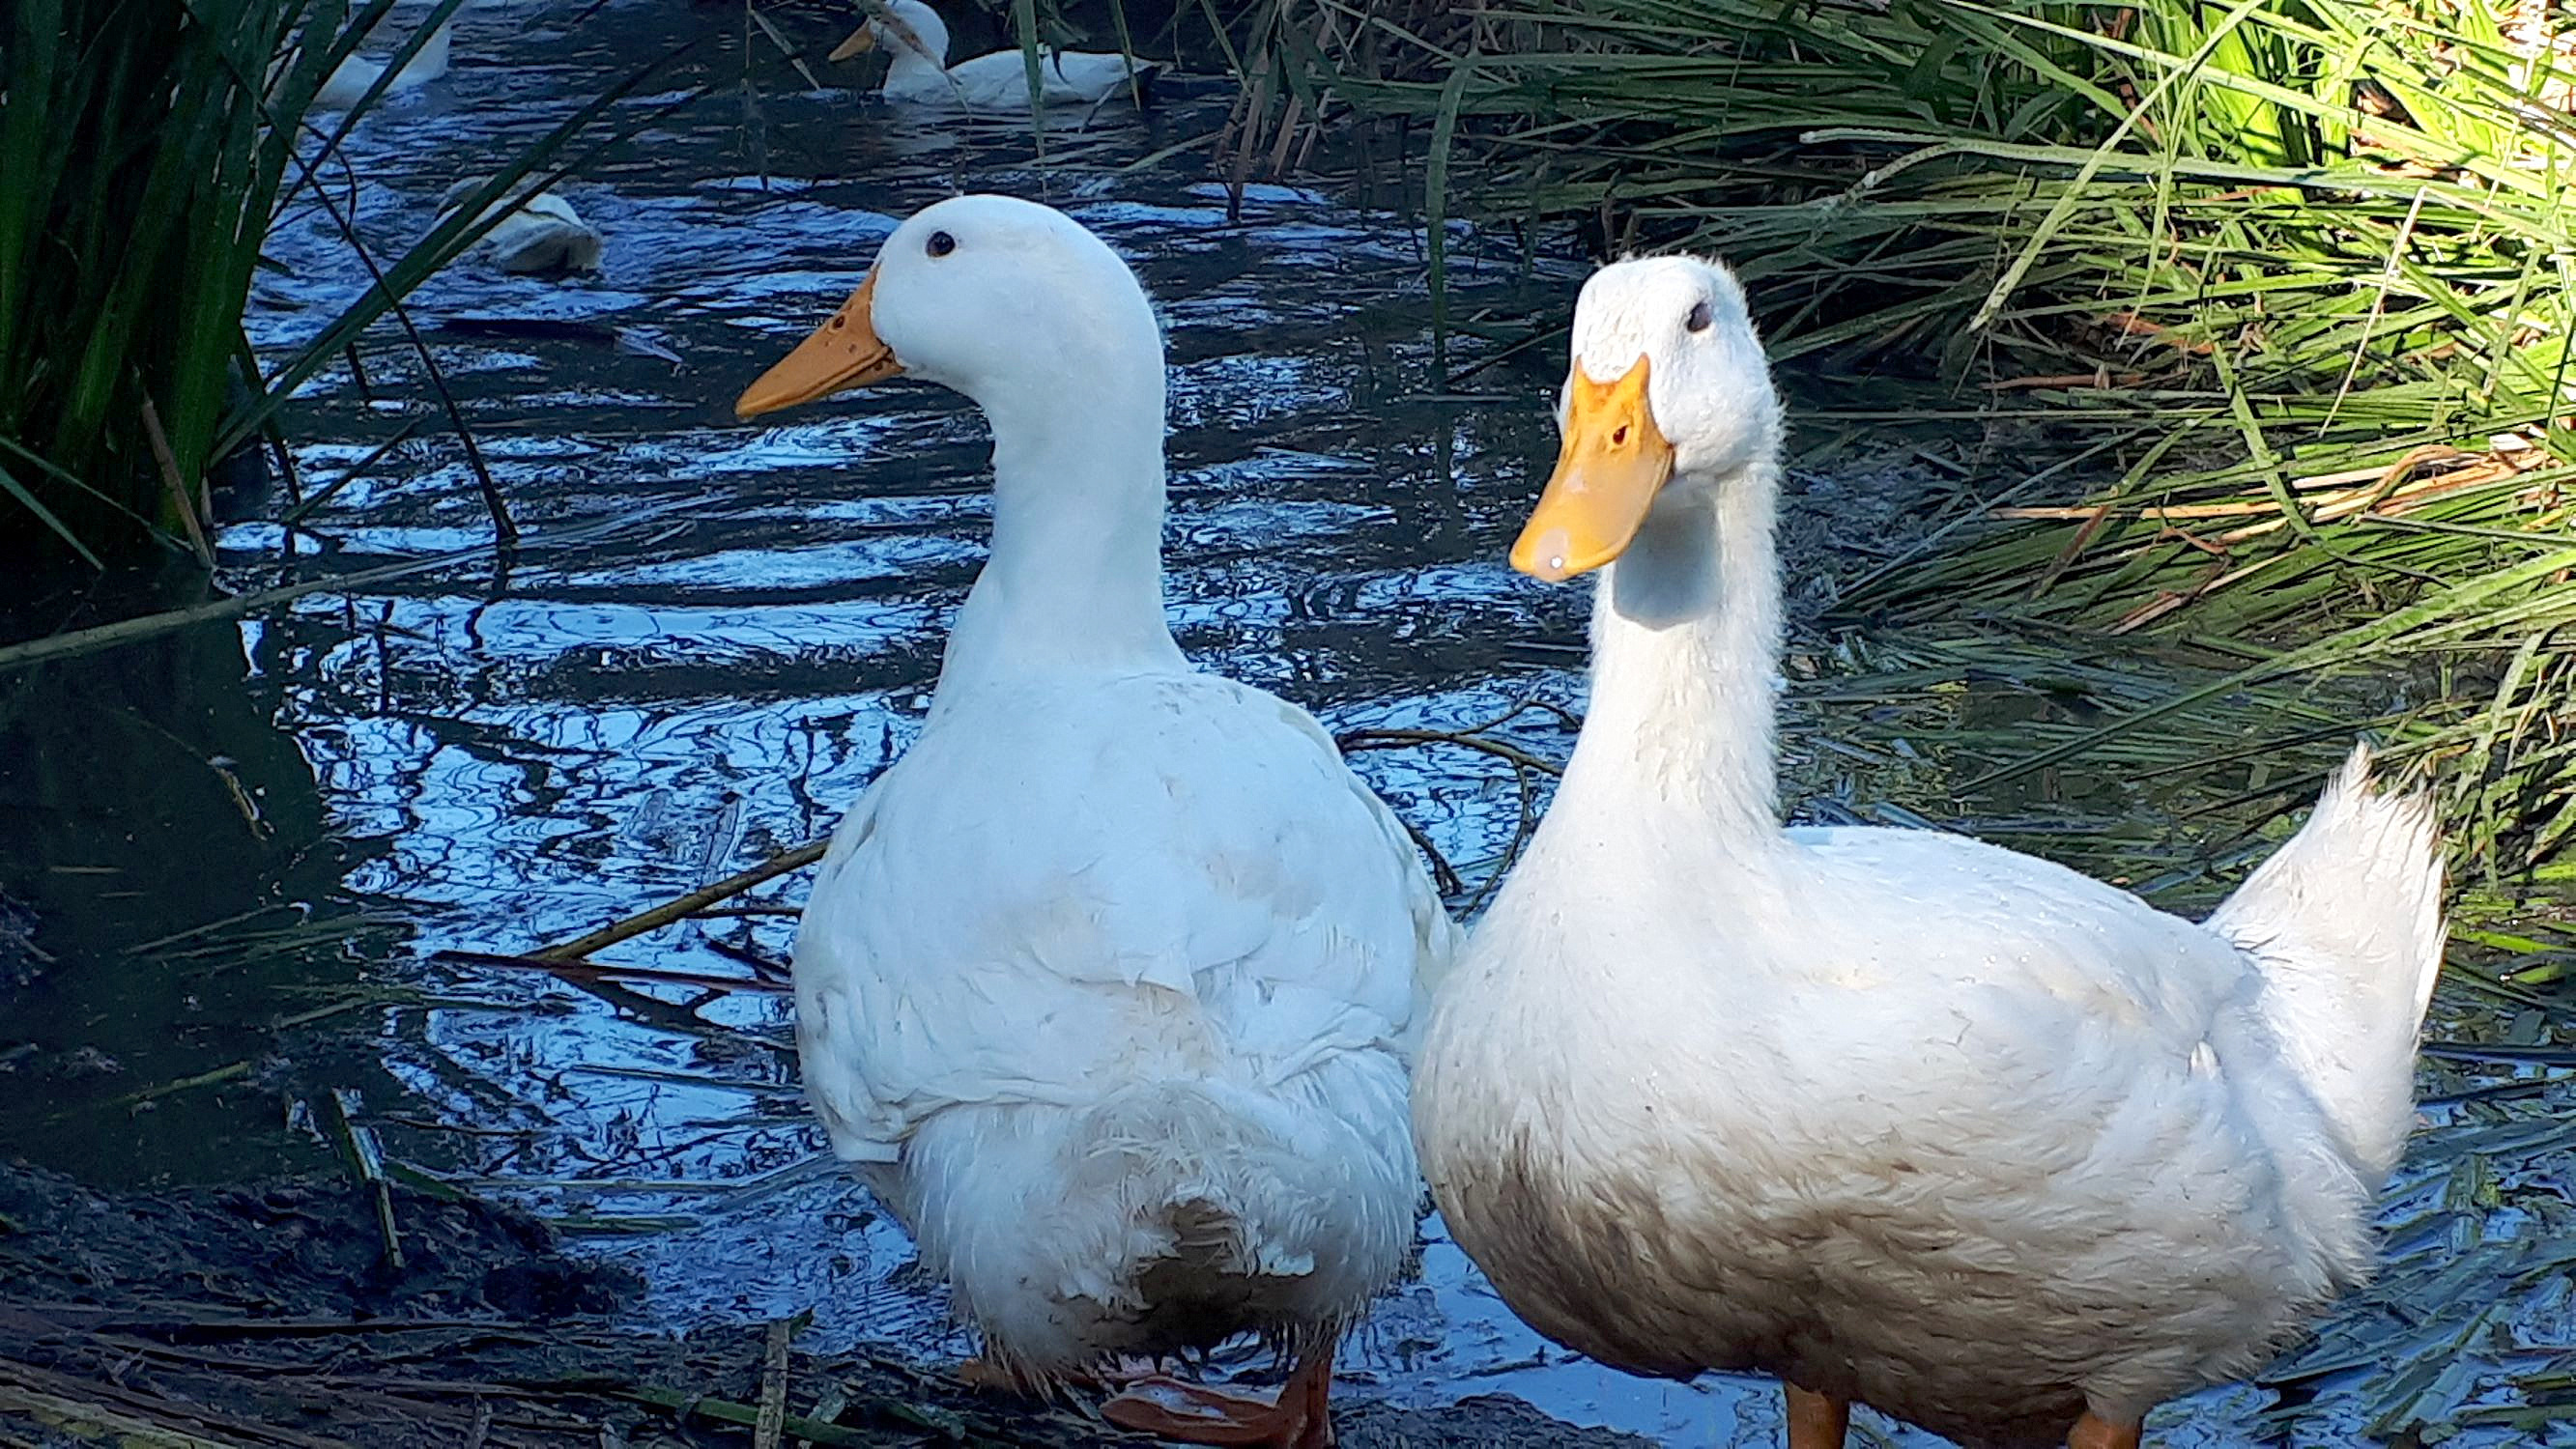 Mature ducks with access to fresh water